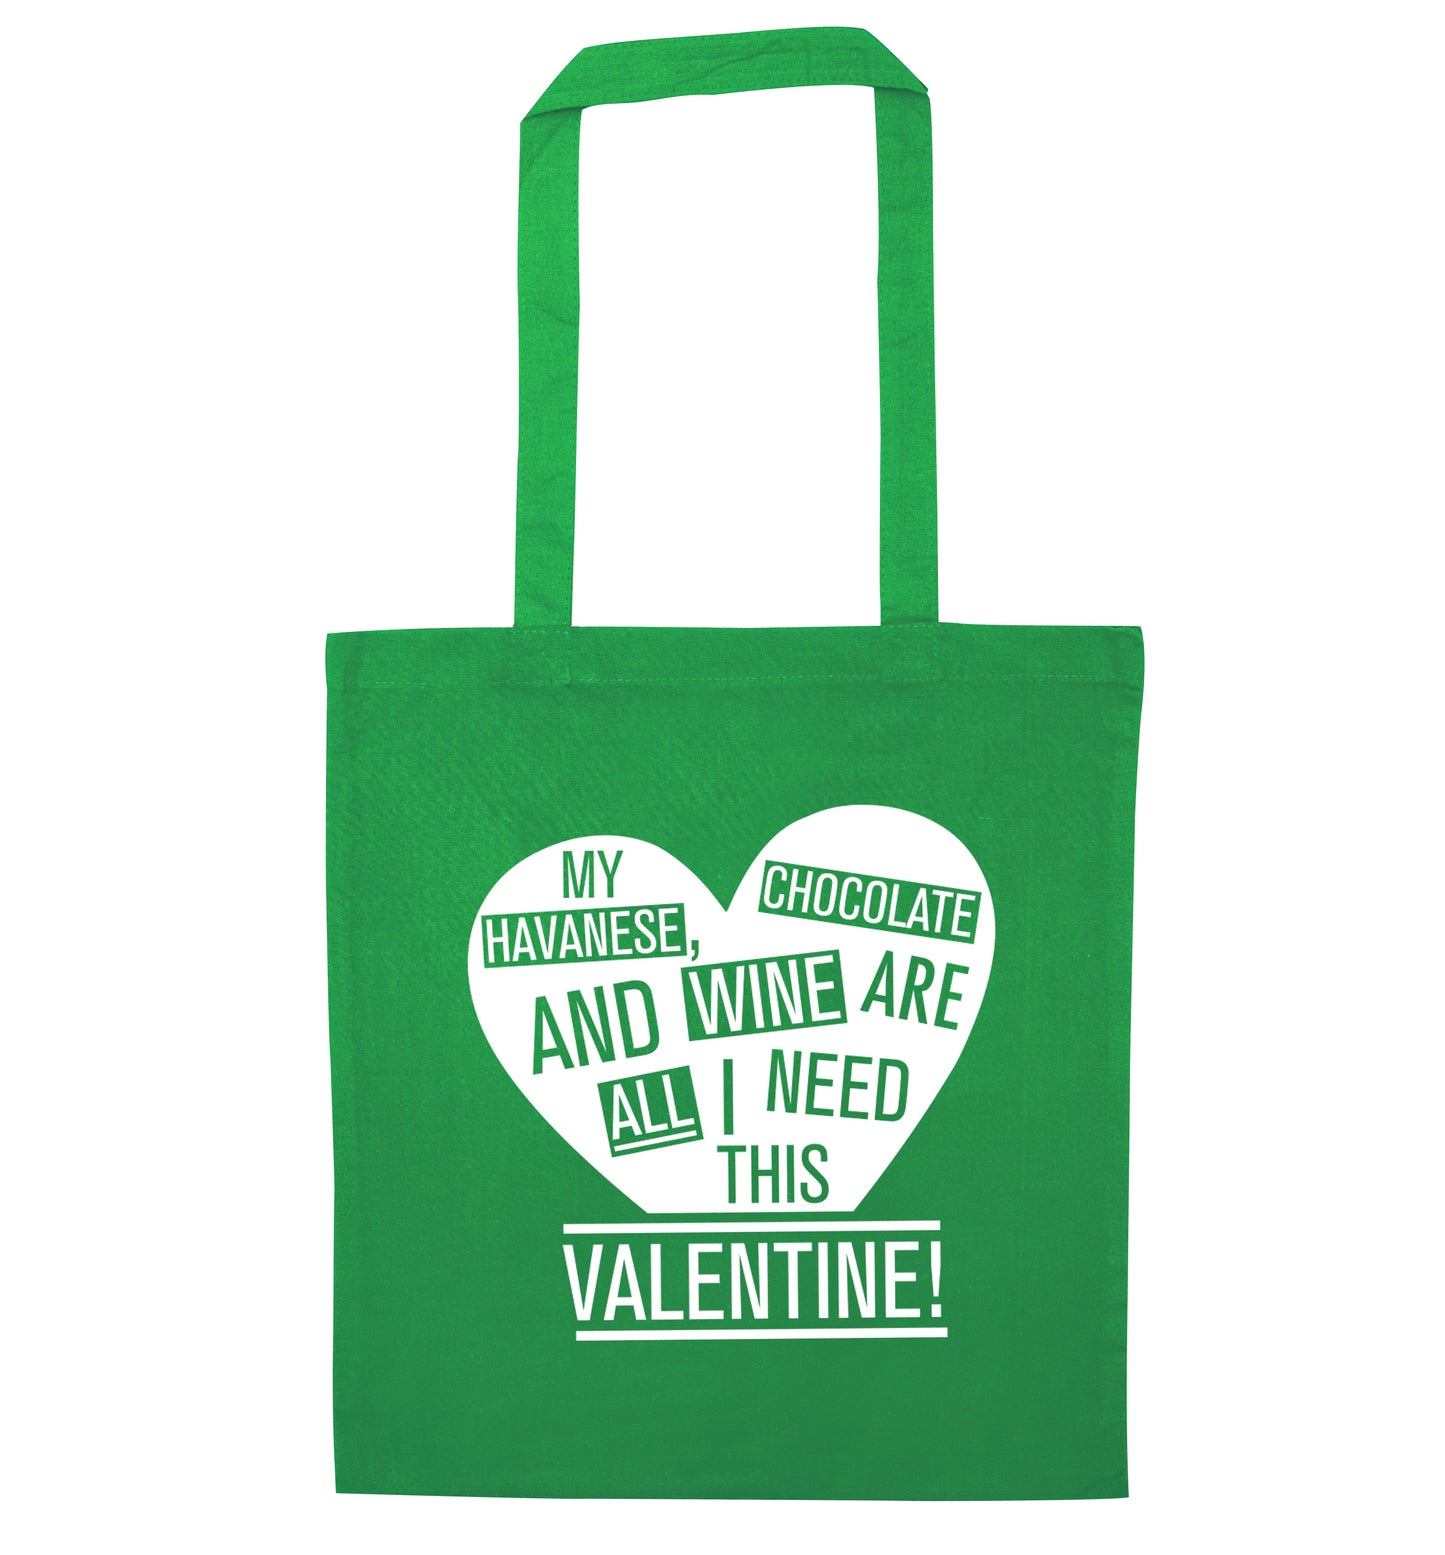 My havanese, chocolate and wine are all I need this valentine! green tote bag